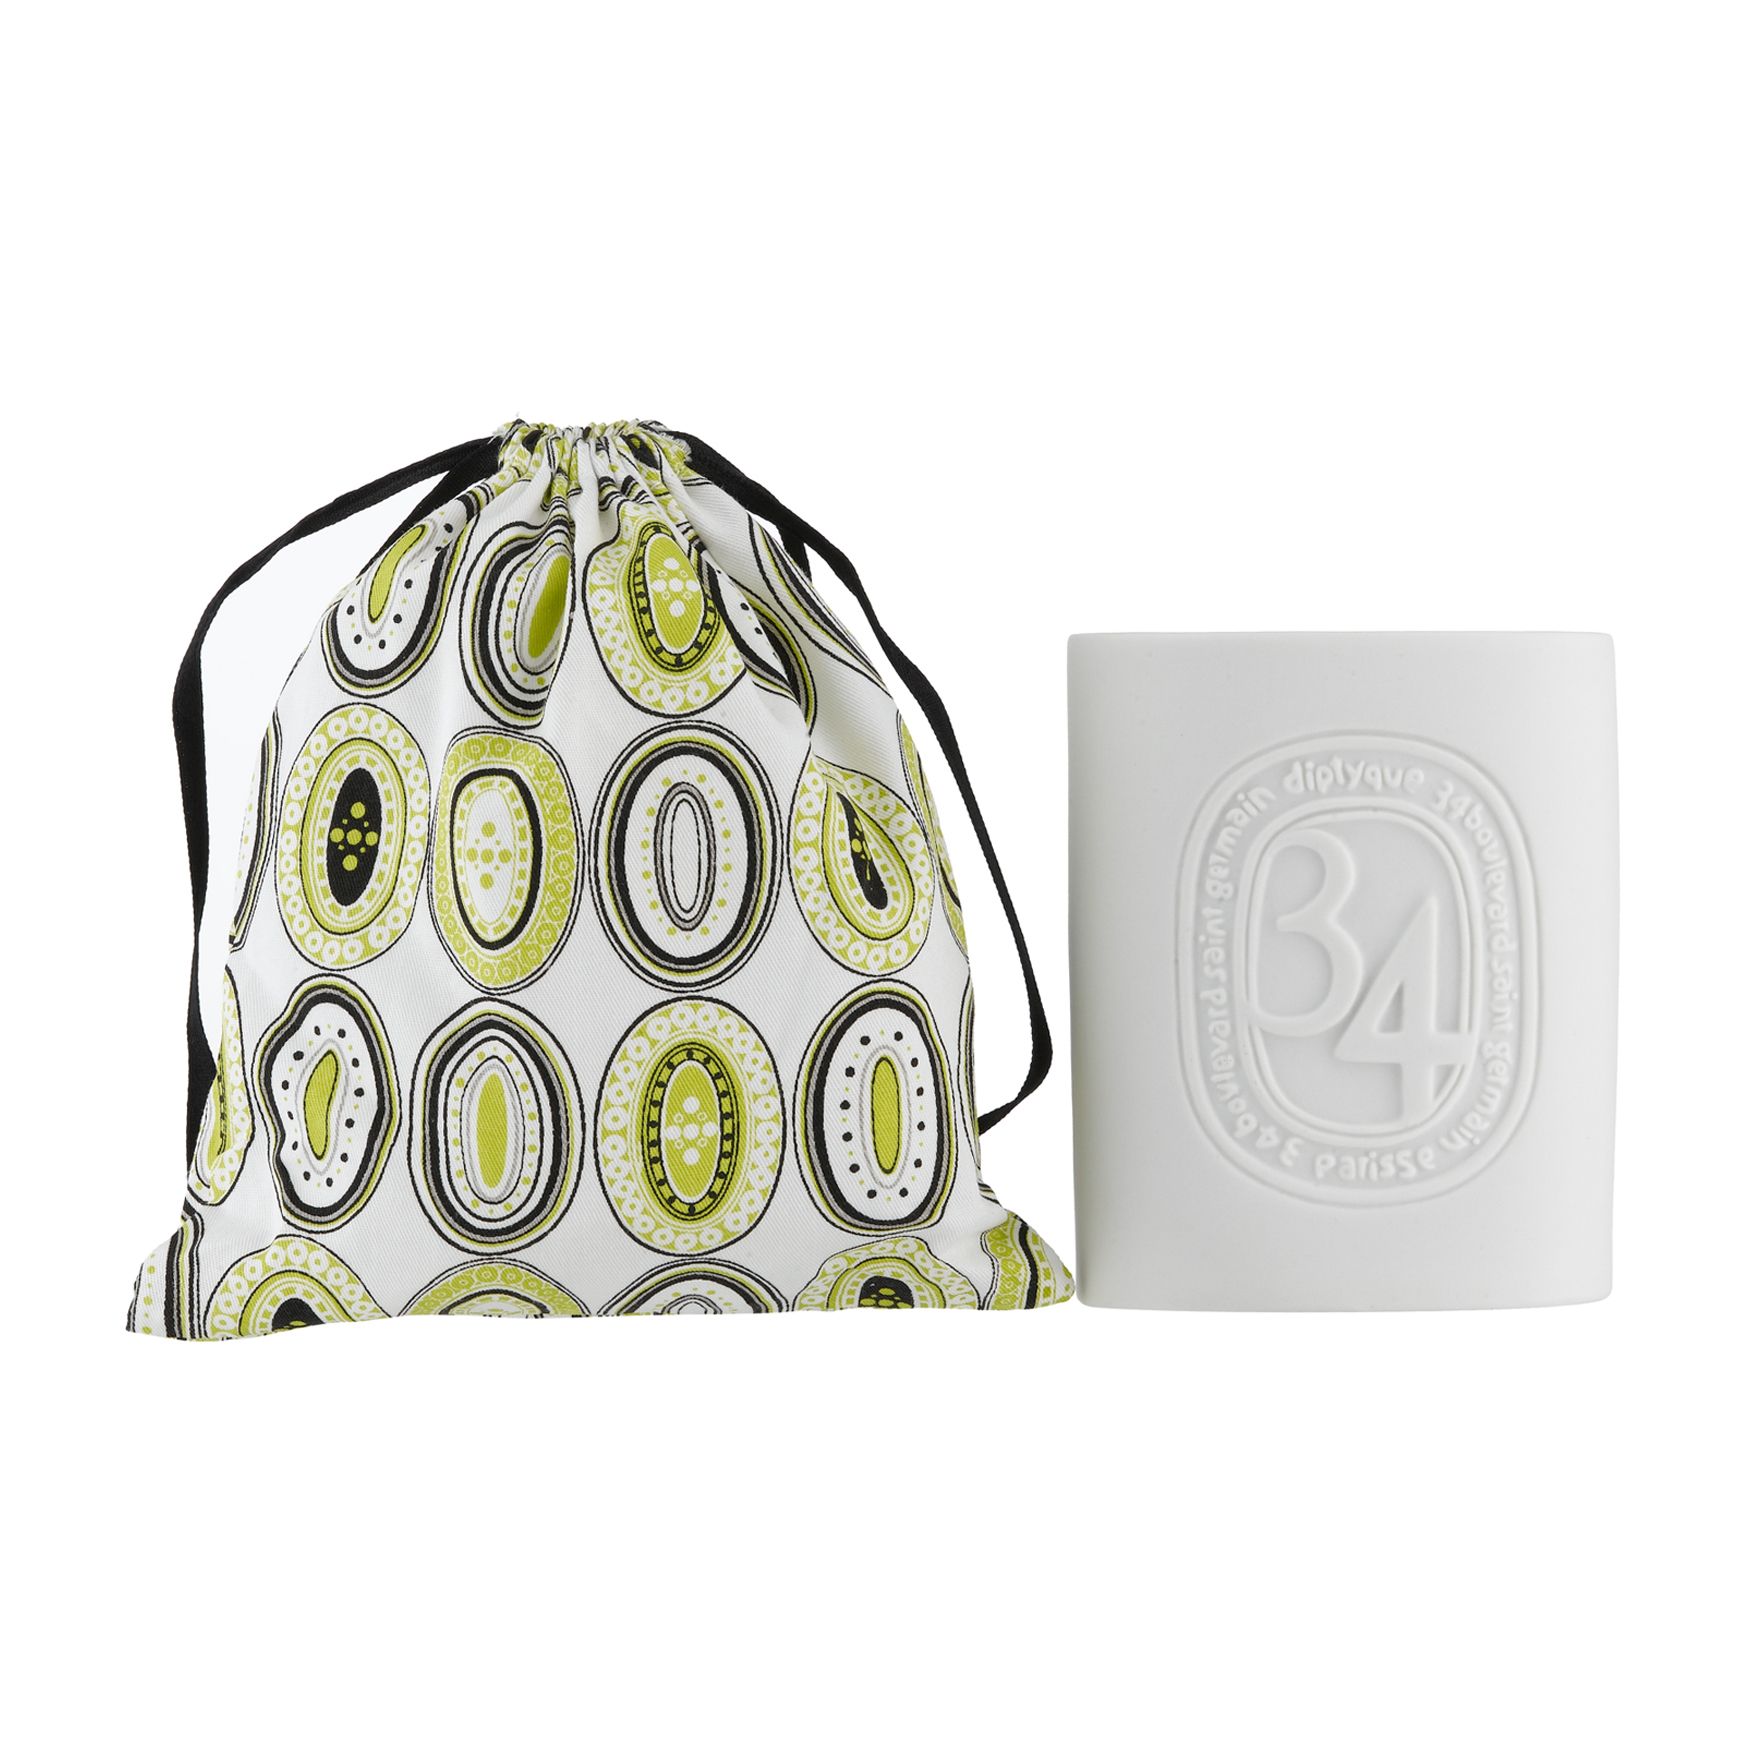 Diptyque

34 Blvd St.germain Scented Candle 7.7oz

220G | Space NK (EU)